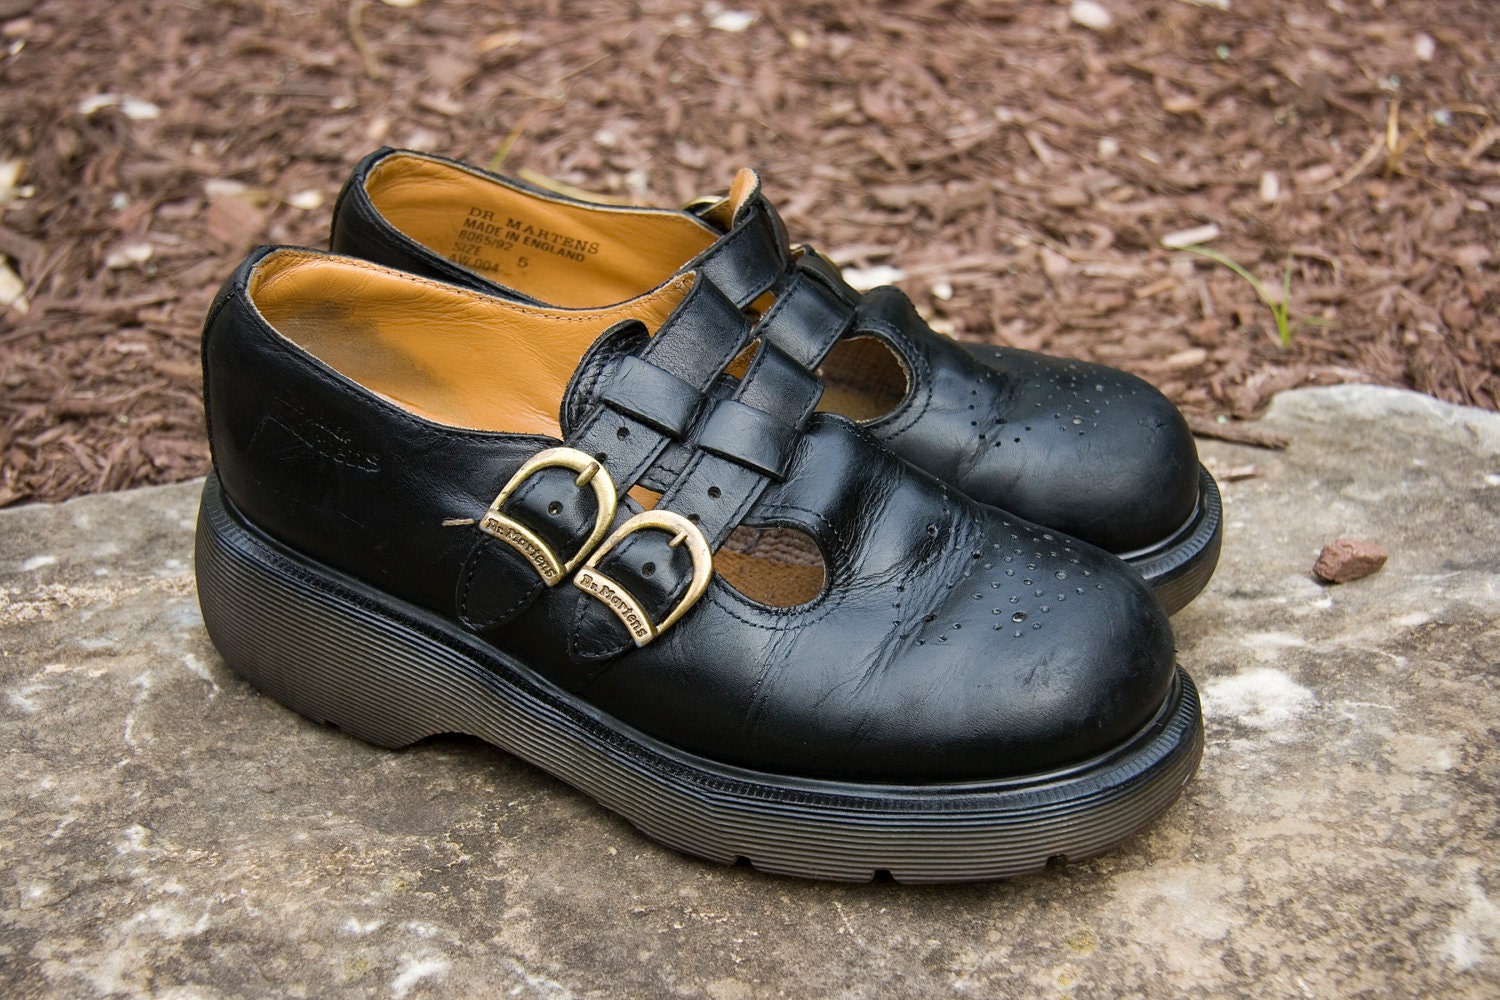 Doc Martens Black Mary Jane Shoes with Buckles UK 5 or US